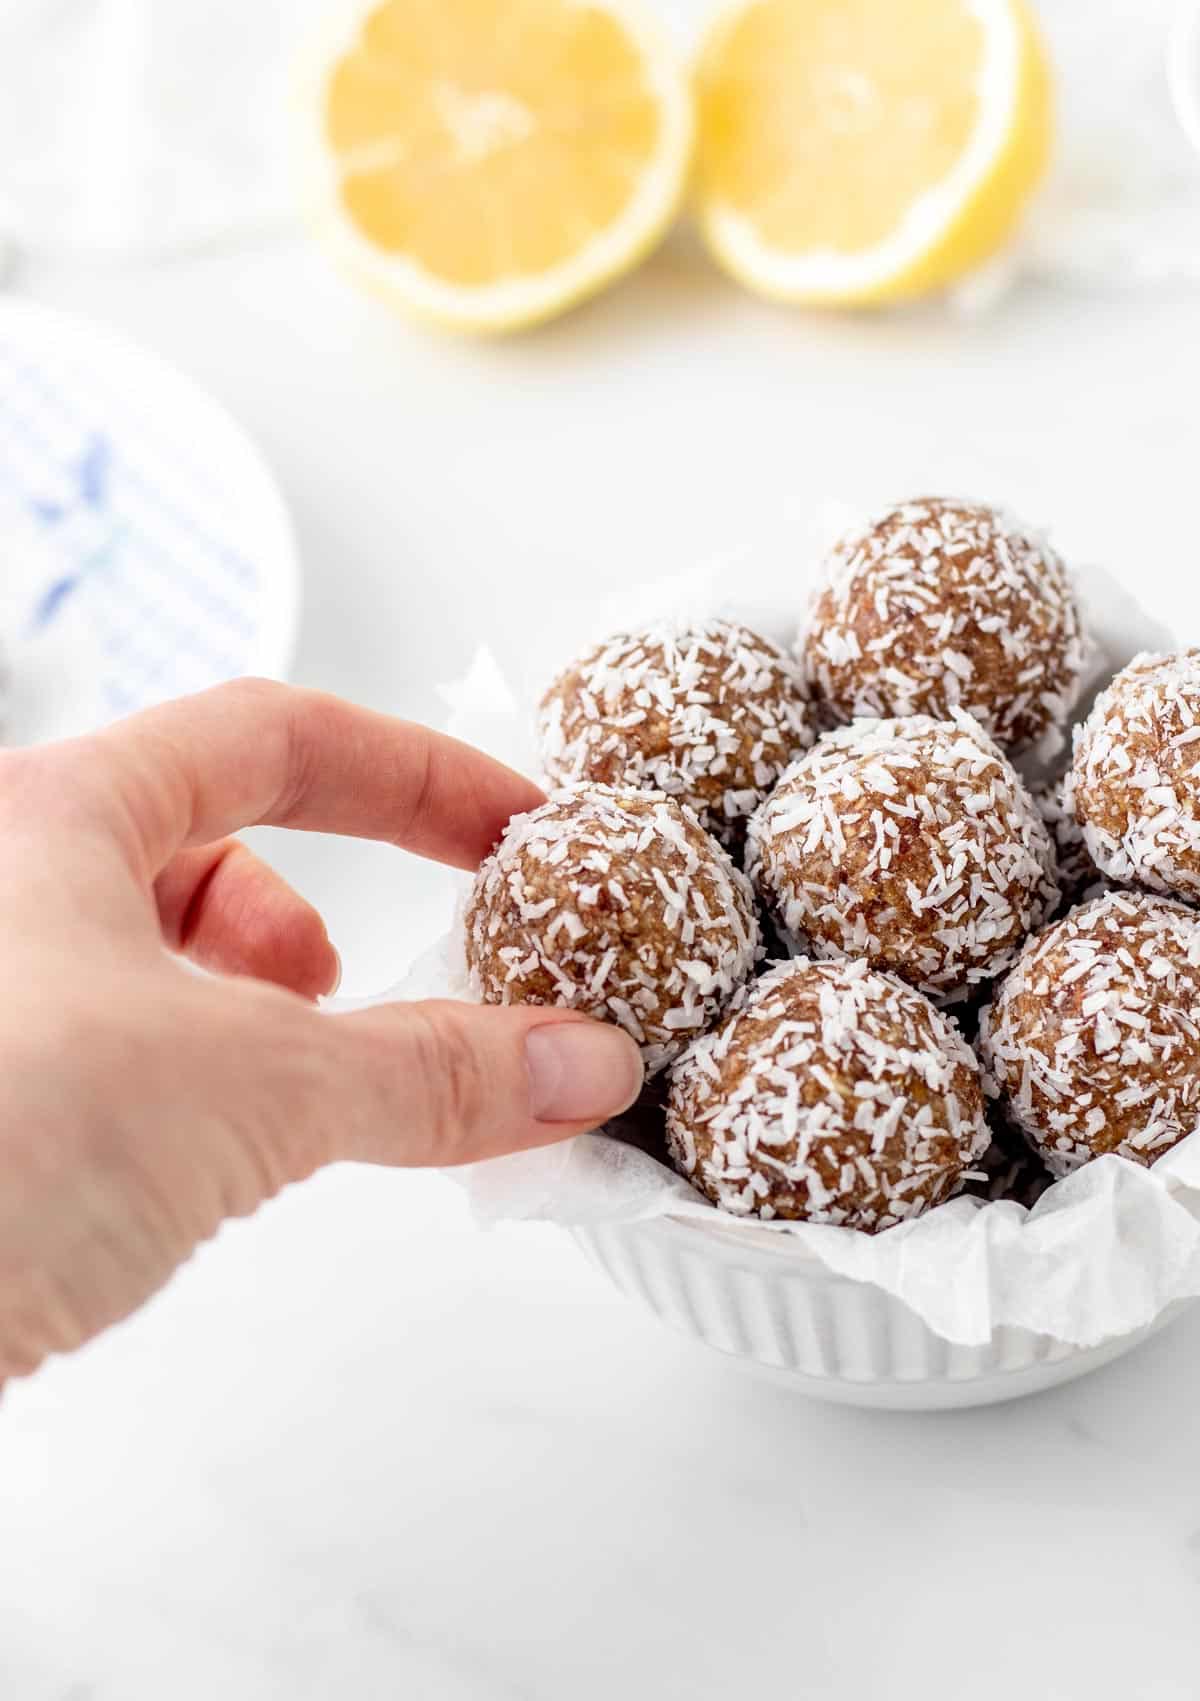 A hand grabbing one of the lemon bliss balls out of a small white bowl.